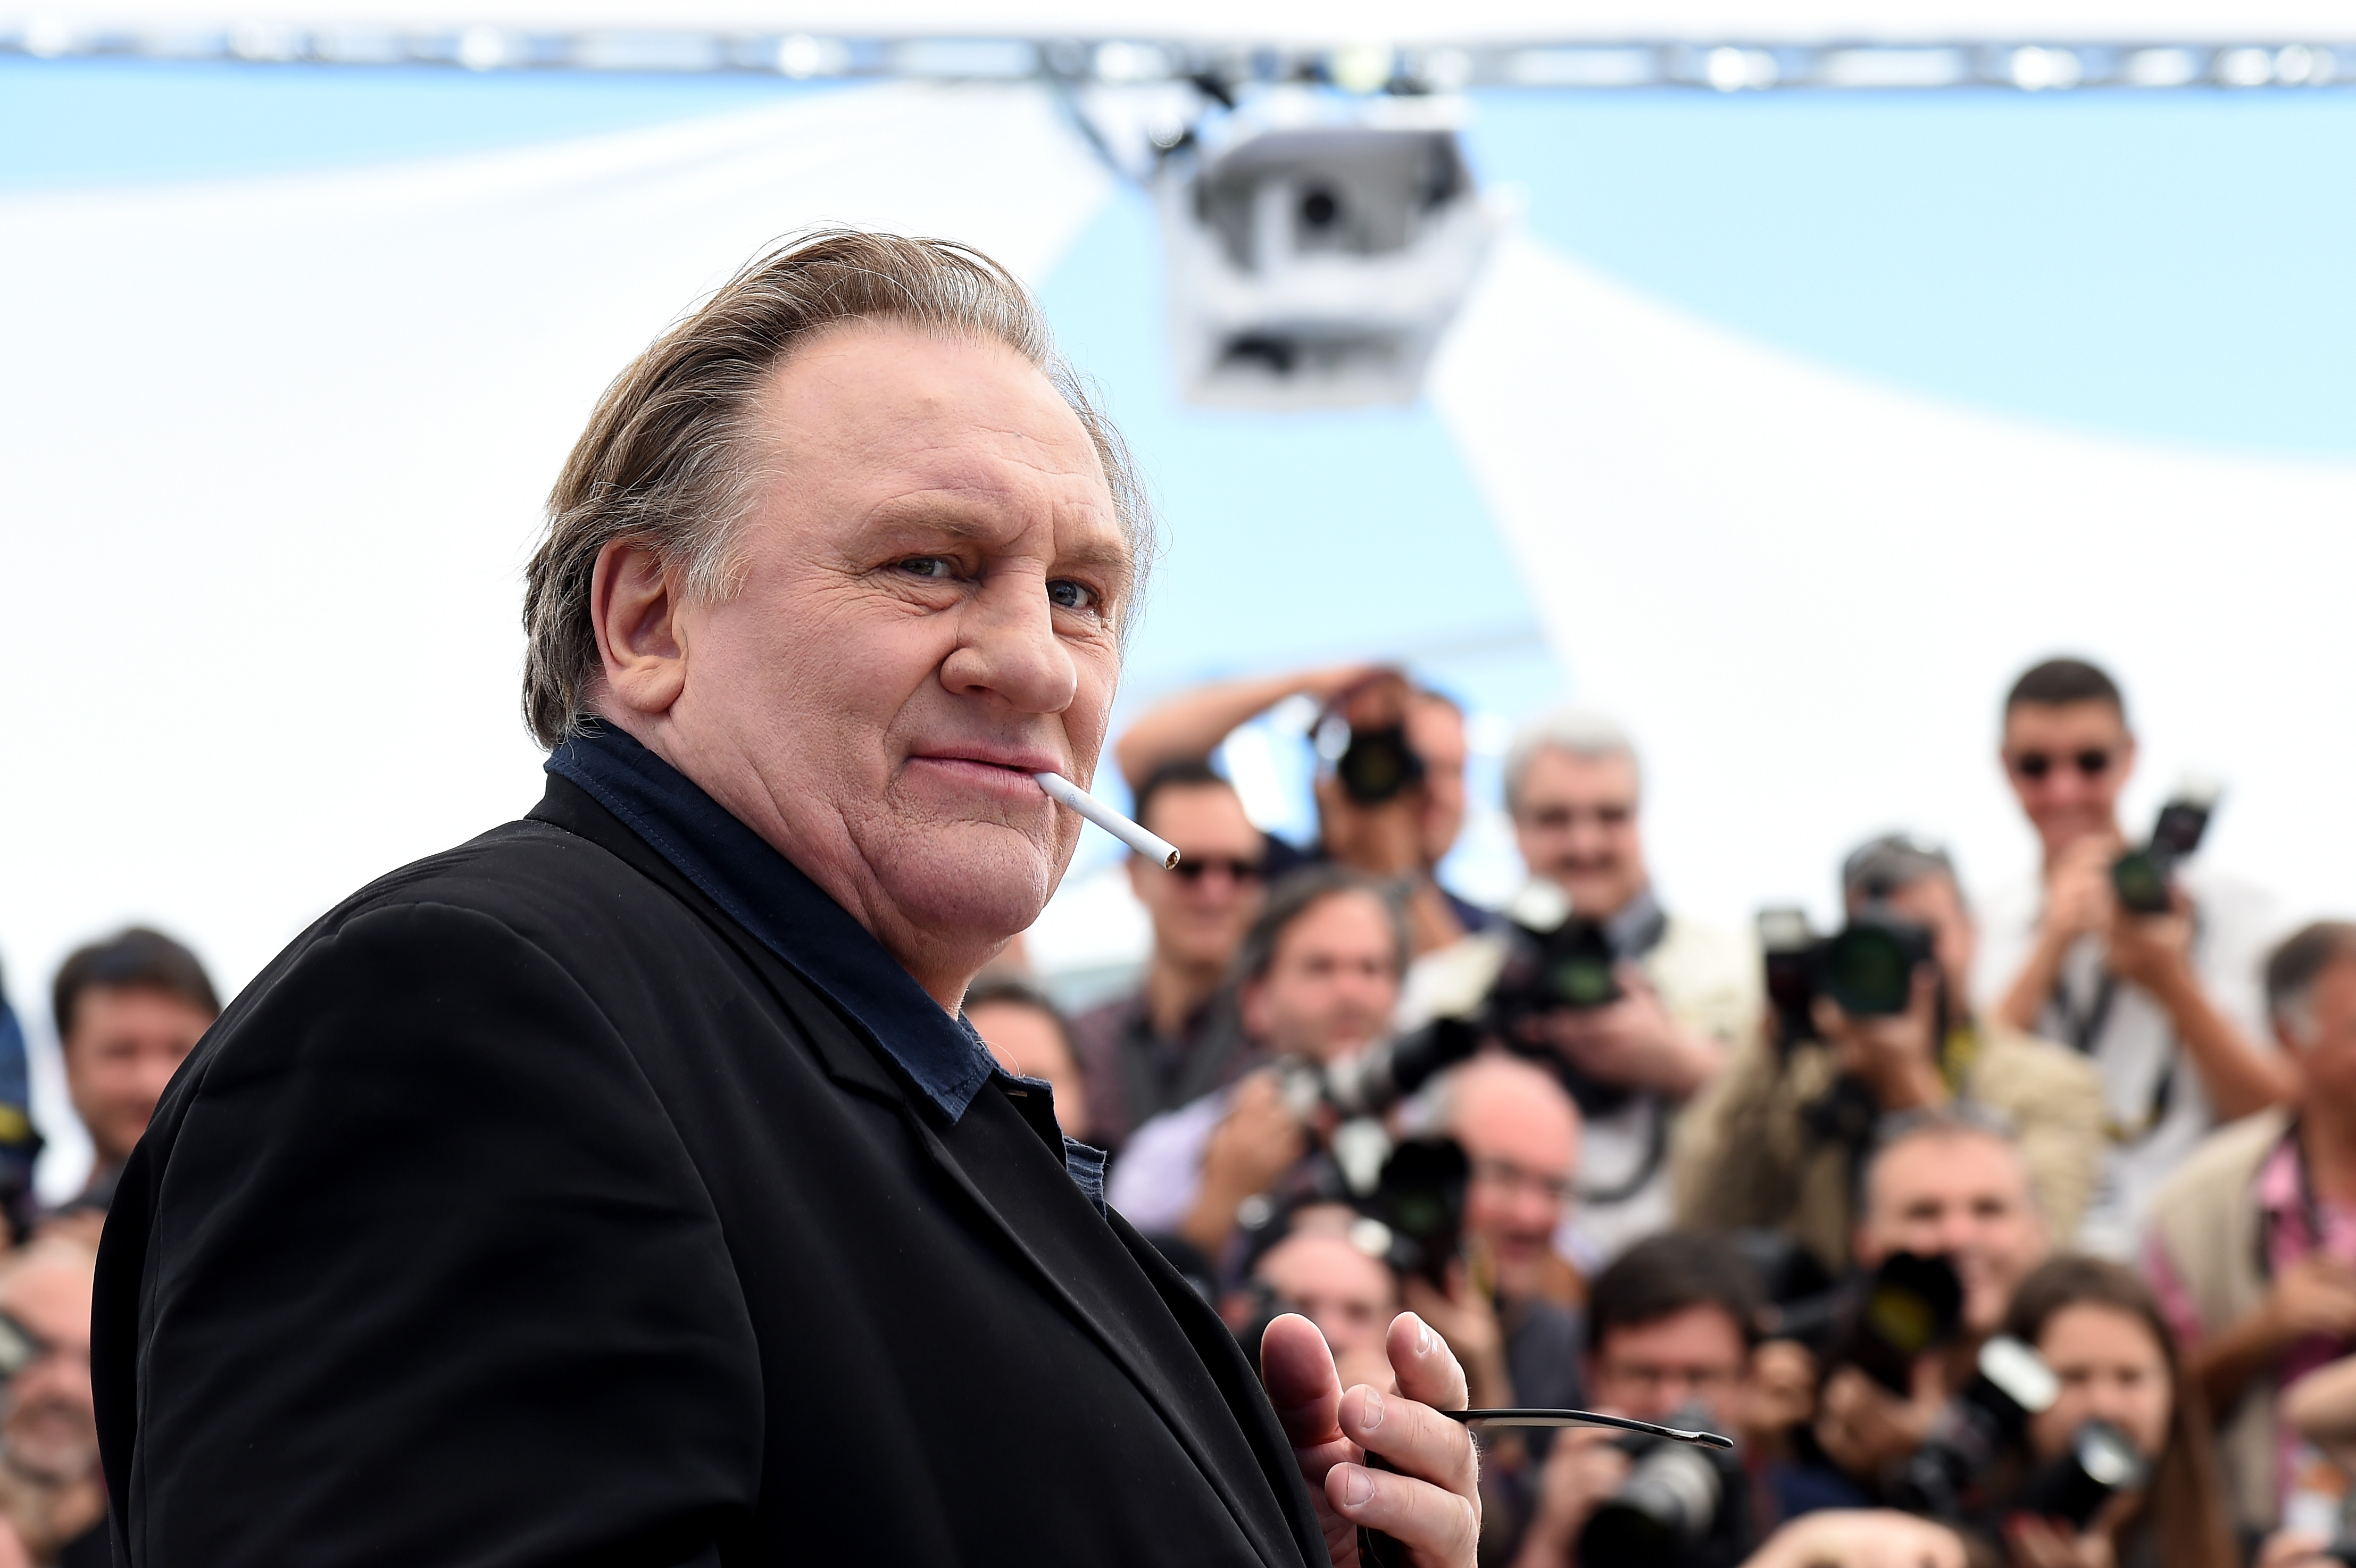  Gerard Depardieu: France takes sides over disgraced actor 